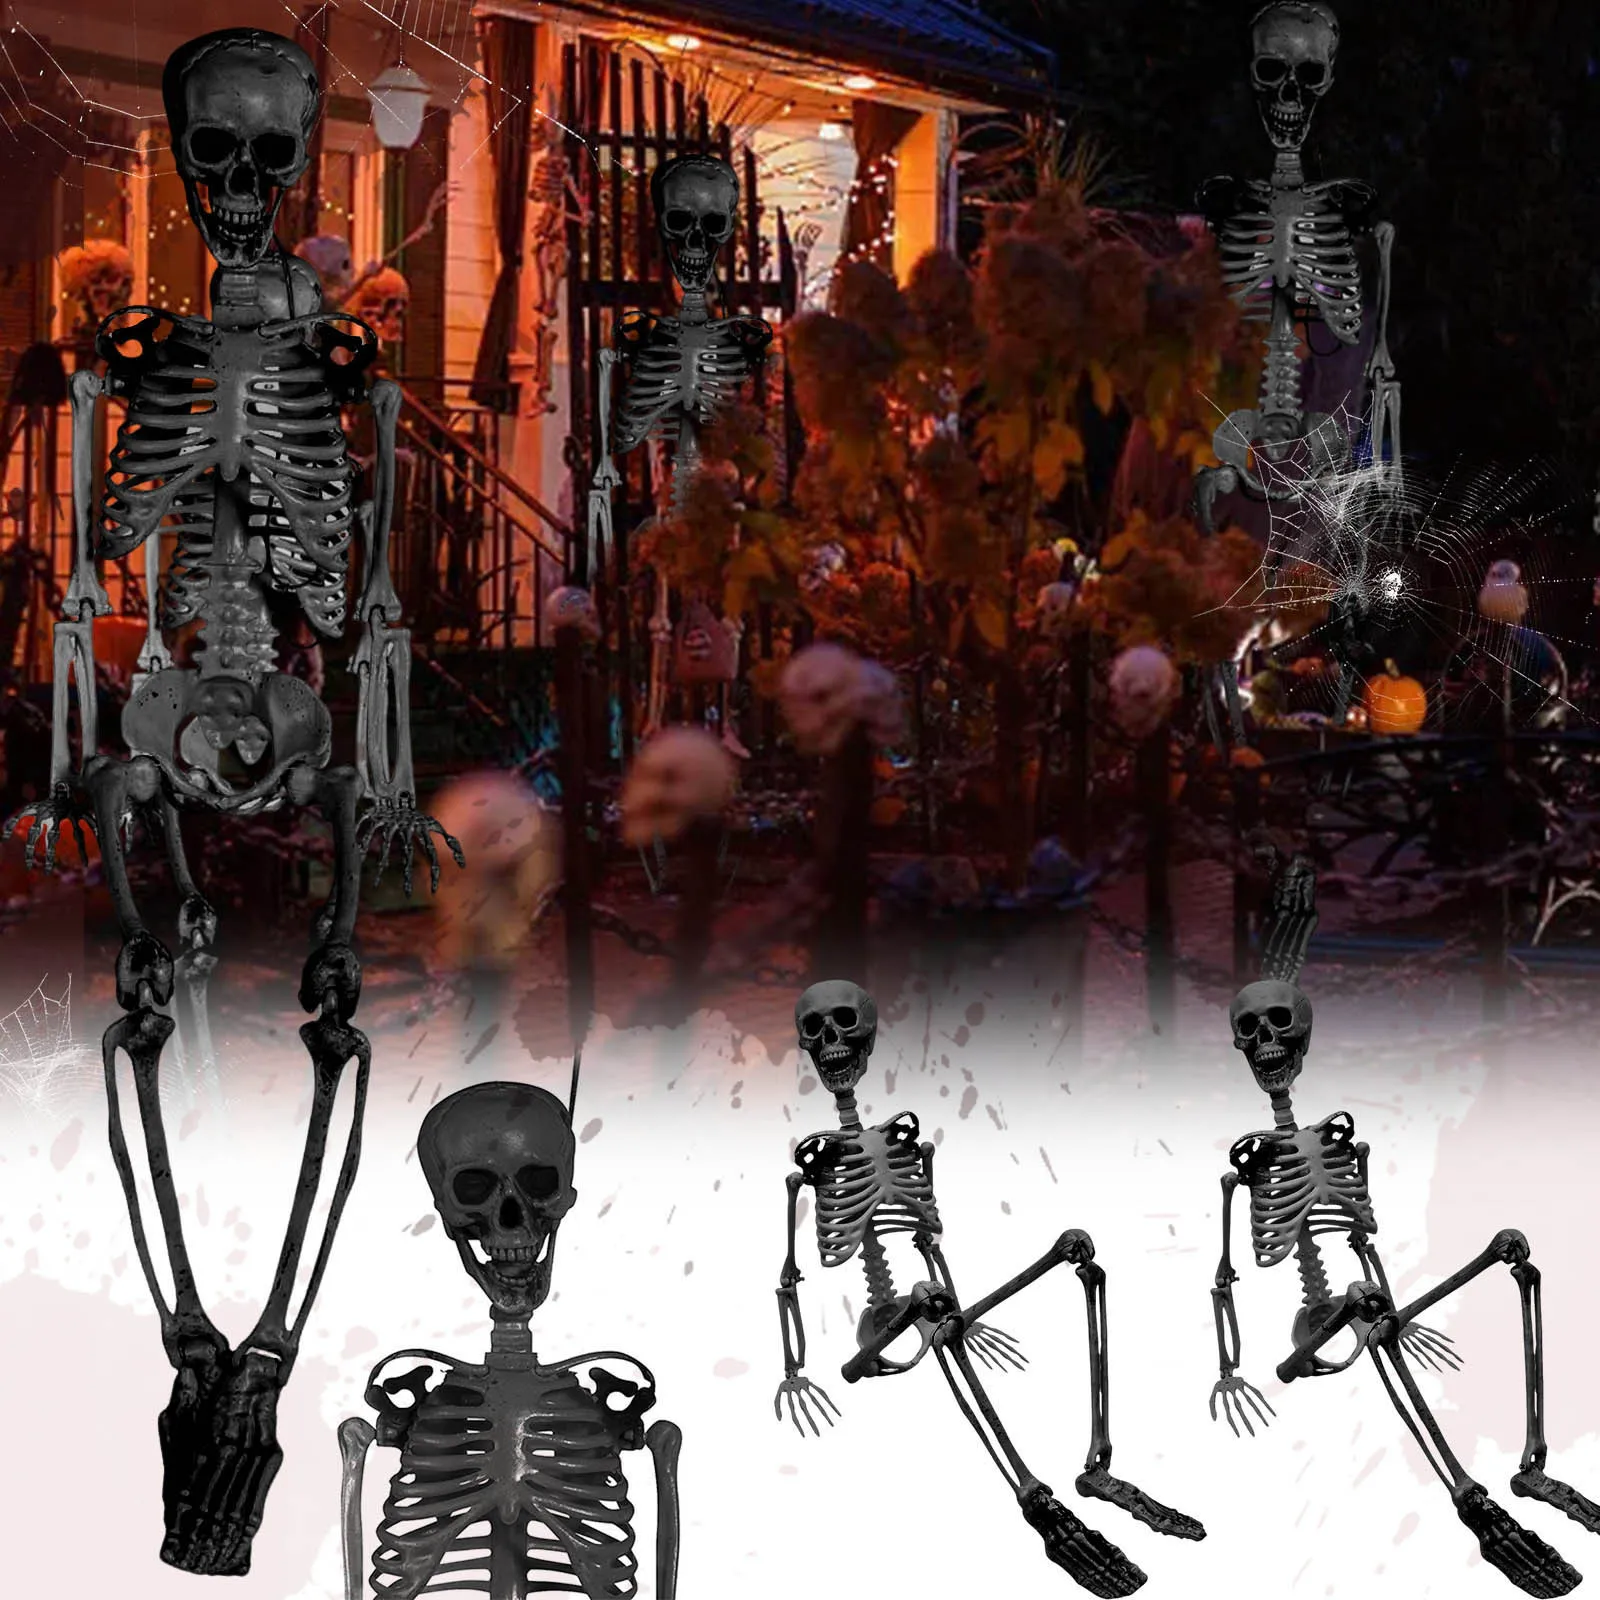 

Halloween Skeleton Prop Full Size Scary Skeleton Mannequin Decoration Suitable For Halloween Or Prank Theme House Decor